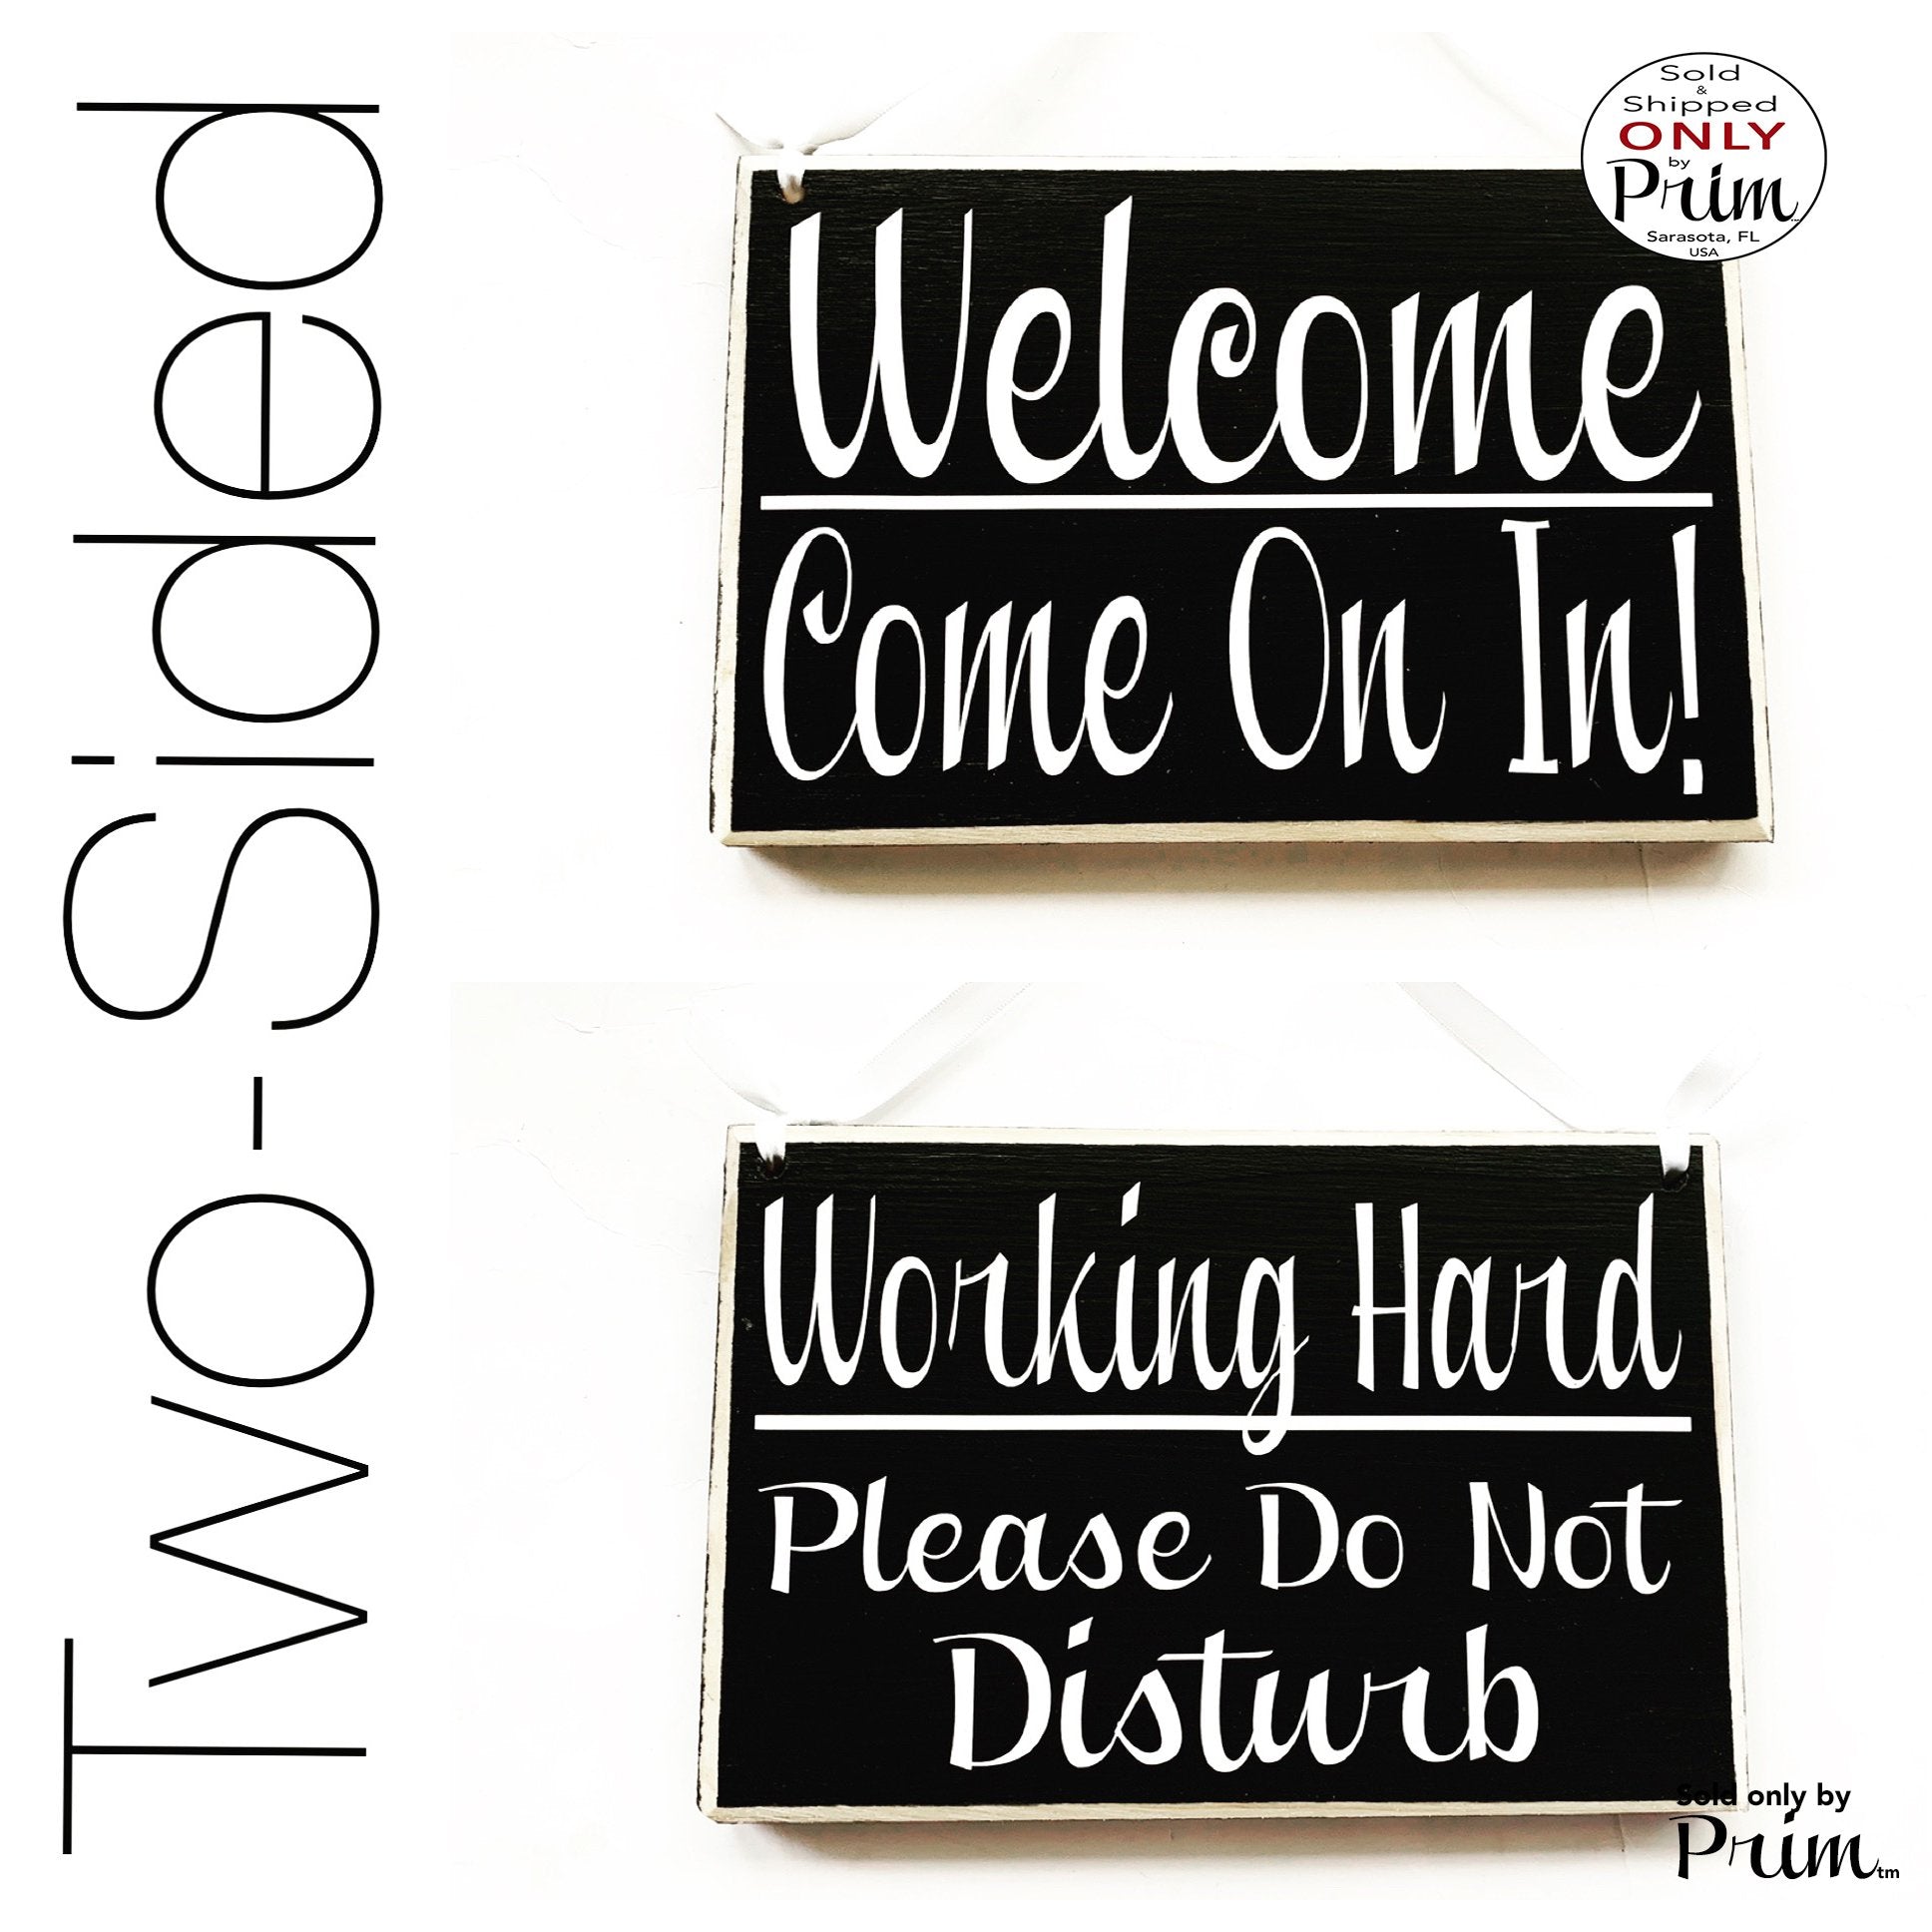 8x6 Welcome Come On In Working Hard Please Do Not Disturb Custom Wood Sign | Office Business In a Meeting in Progress Session Door Plaque 